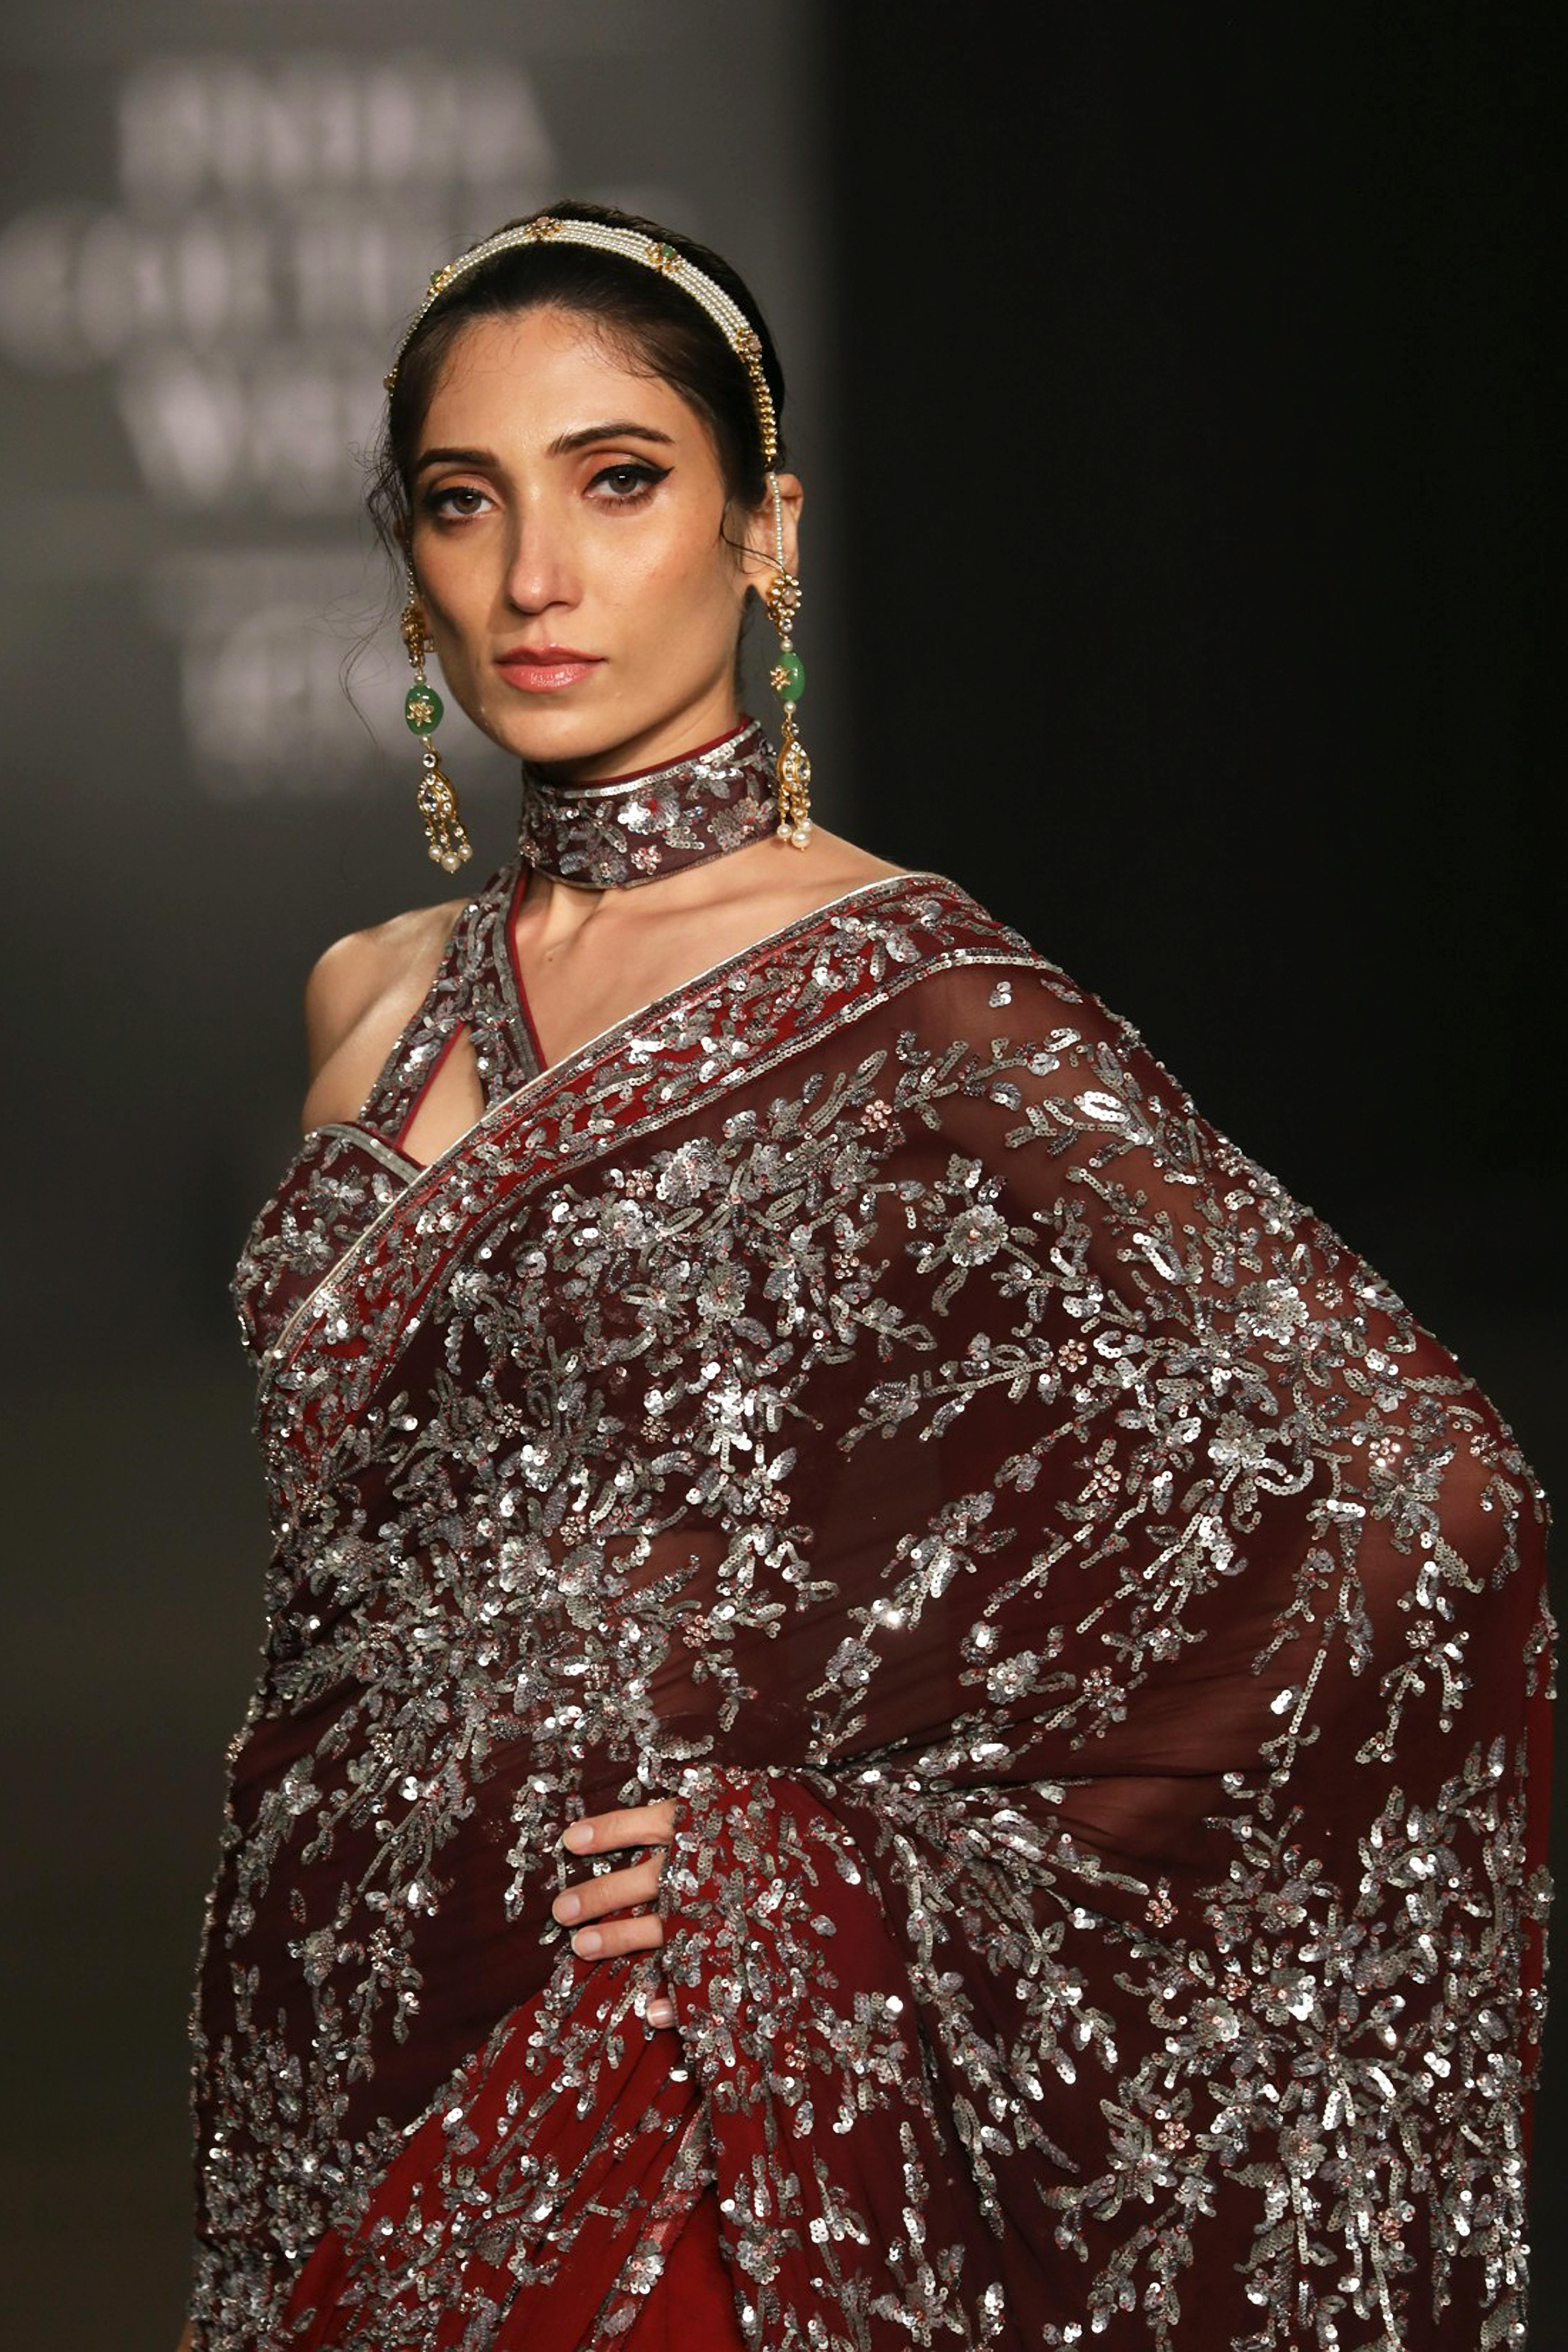 model in red sari with silver sequin floral patterns